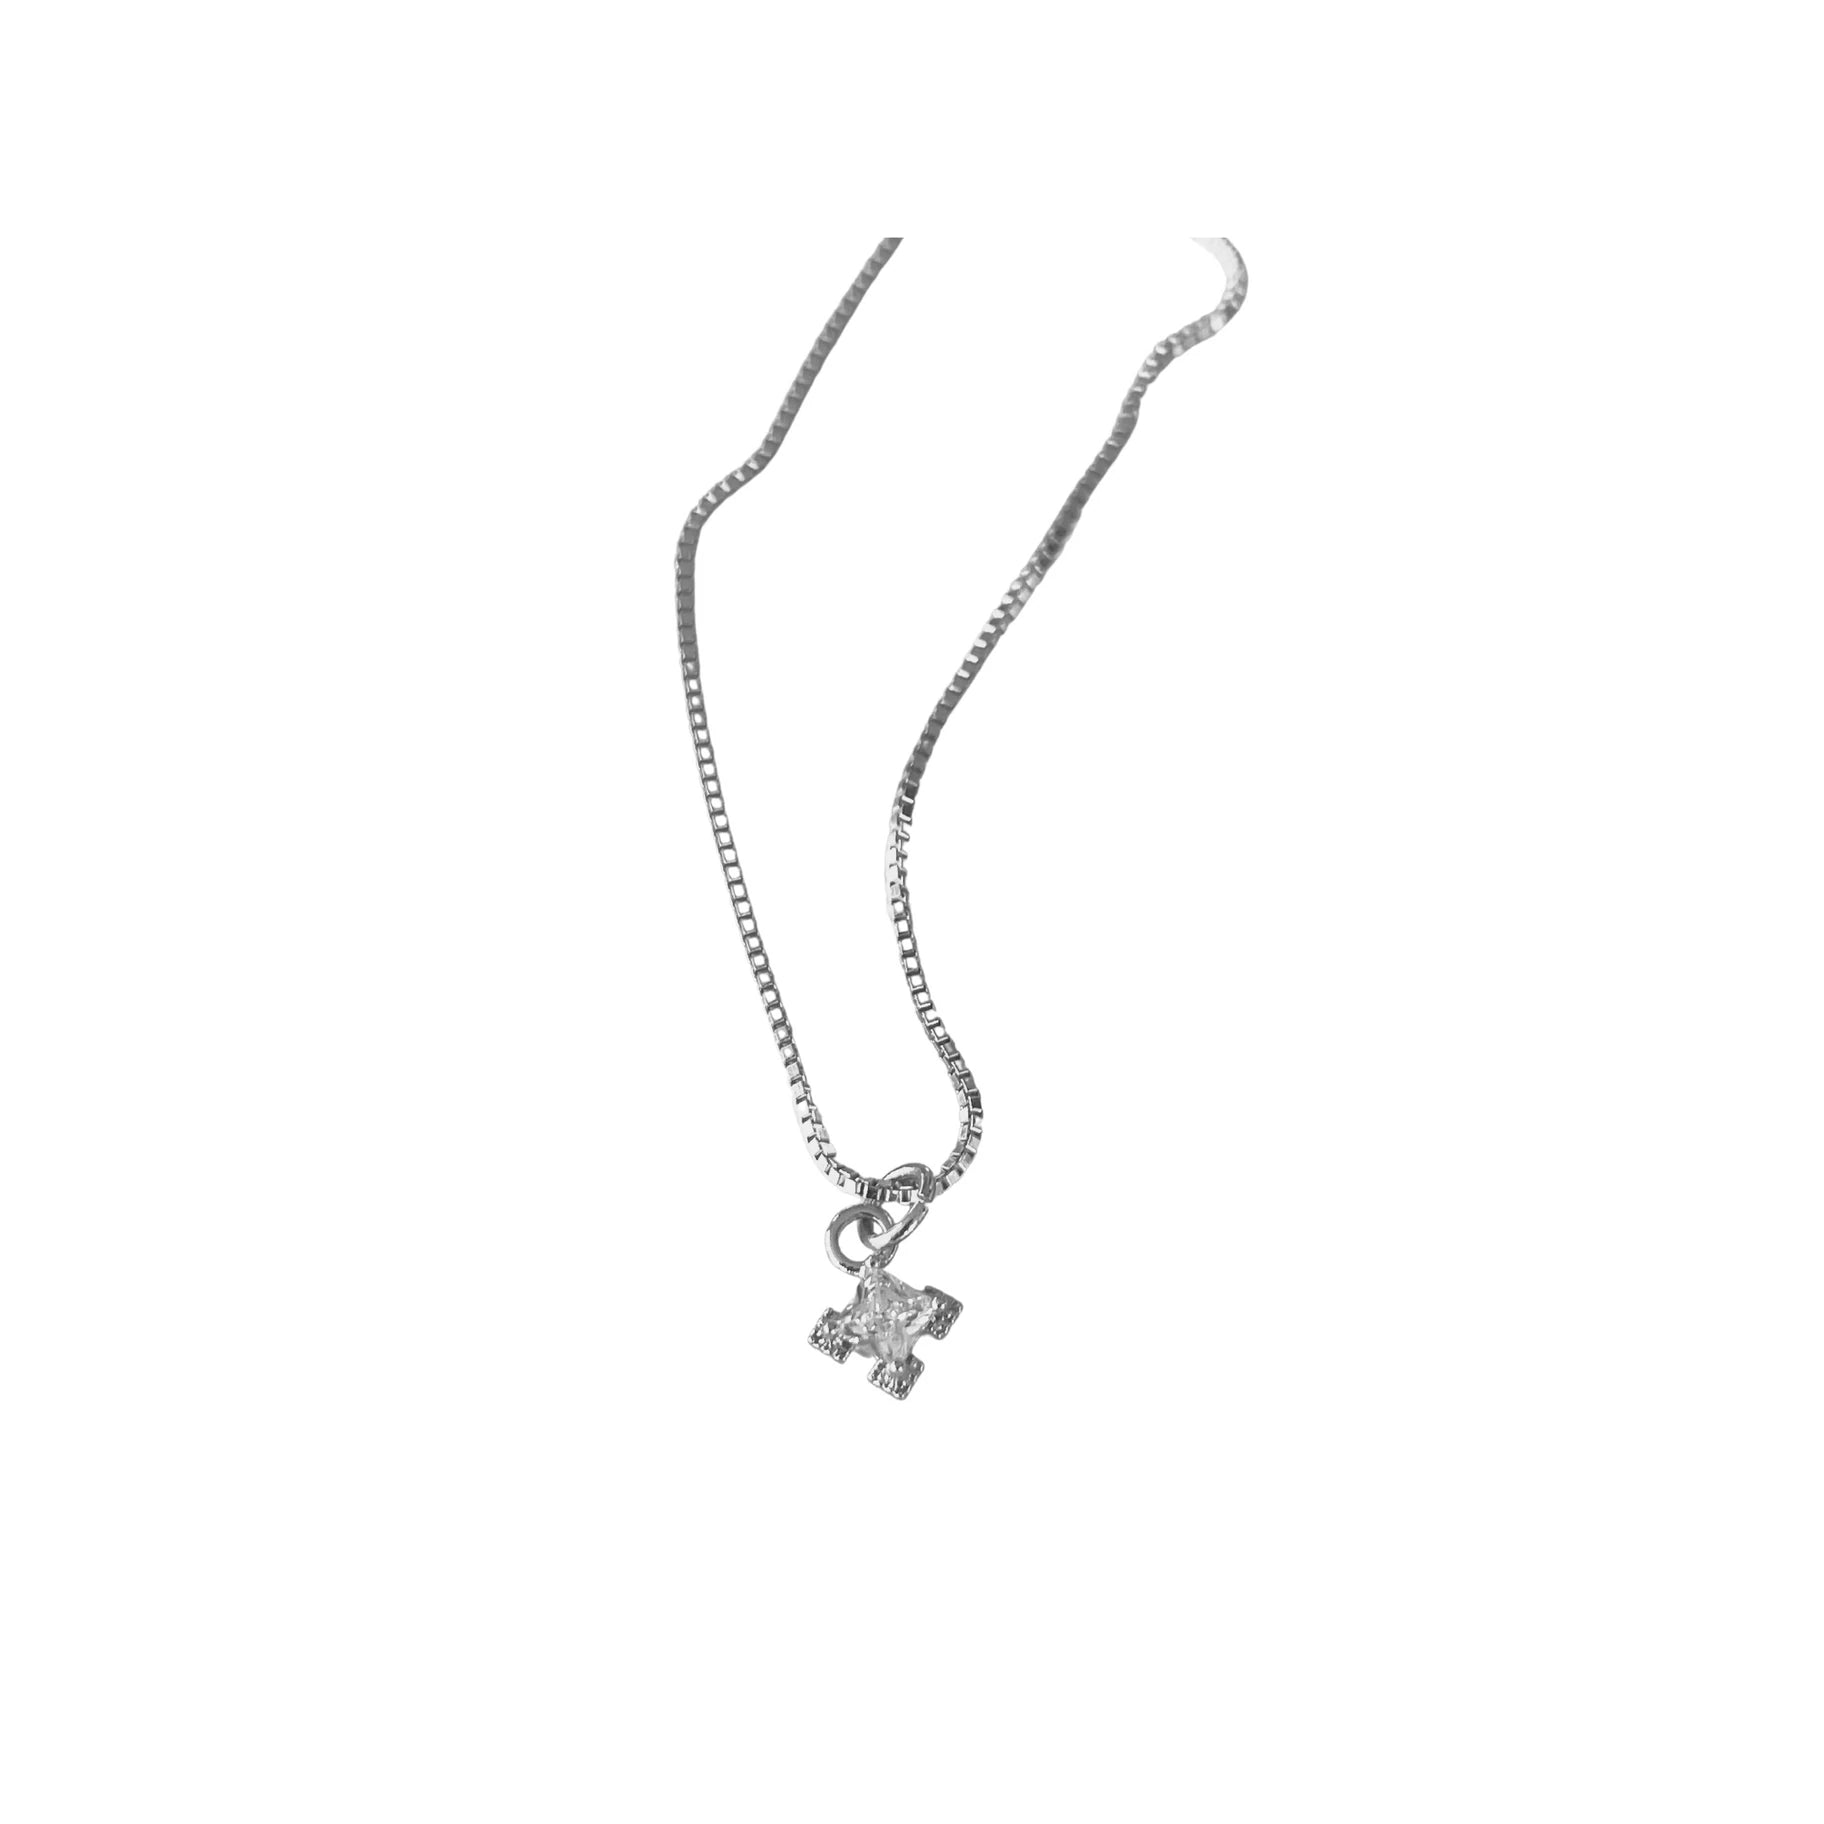 A Dusting of Jewels - Embellishment Necklace | Platinum